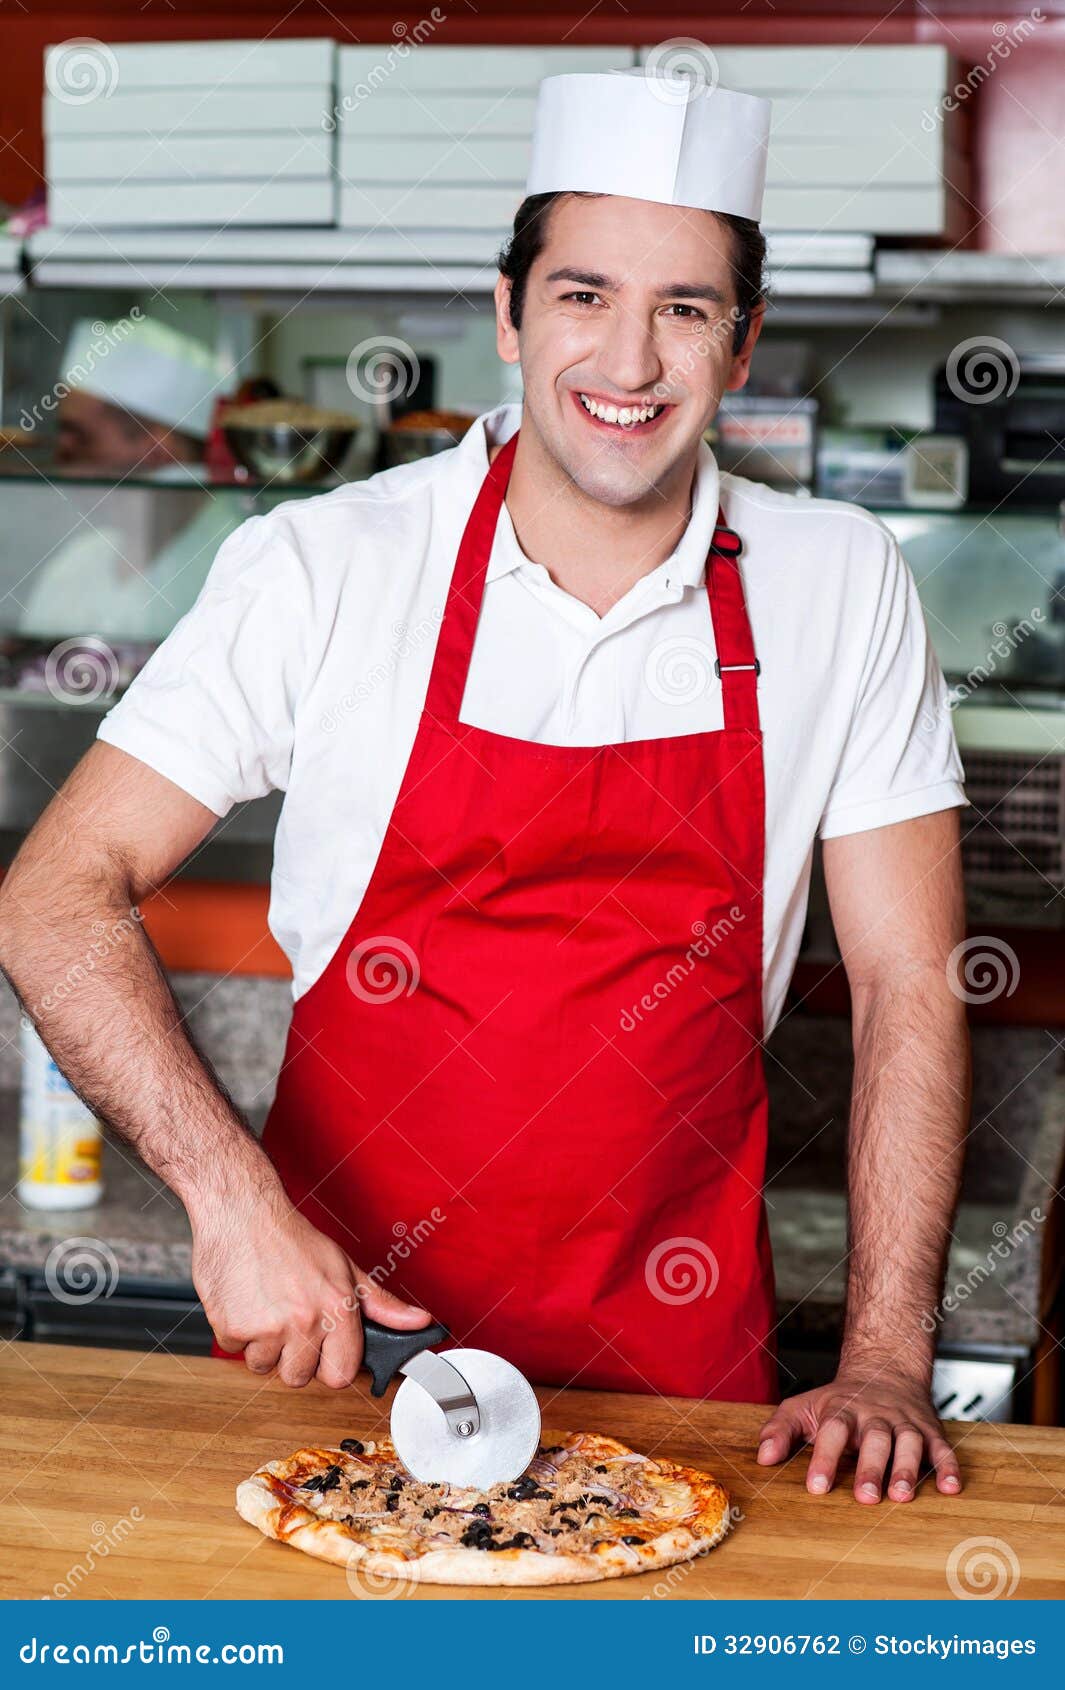 [Image: smiling-chef-cutting-pizza-cutter-young-...906762.jpg]